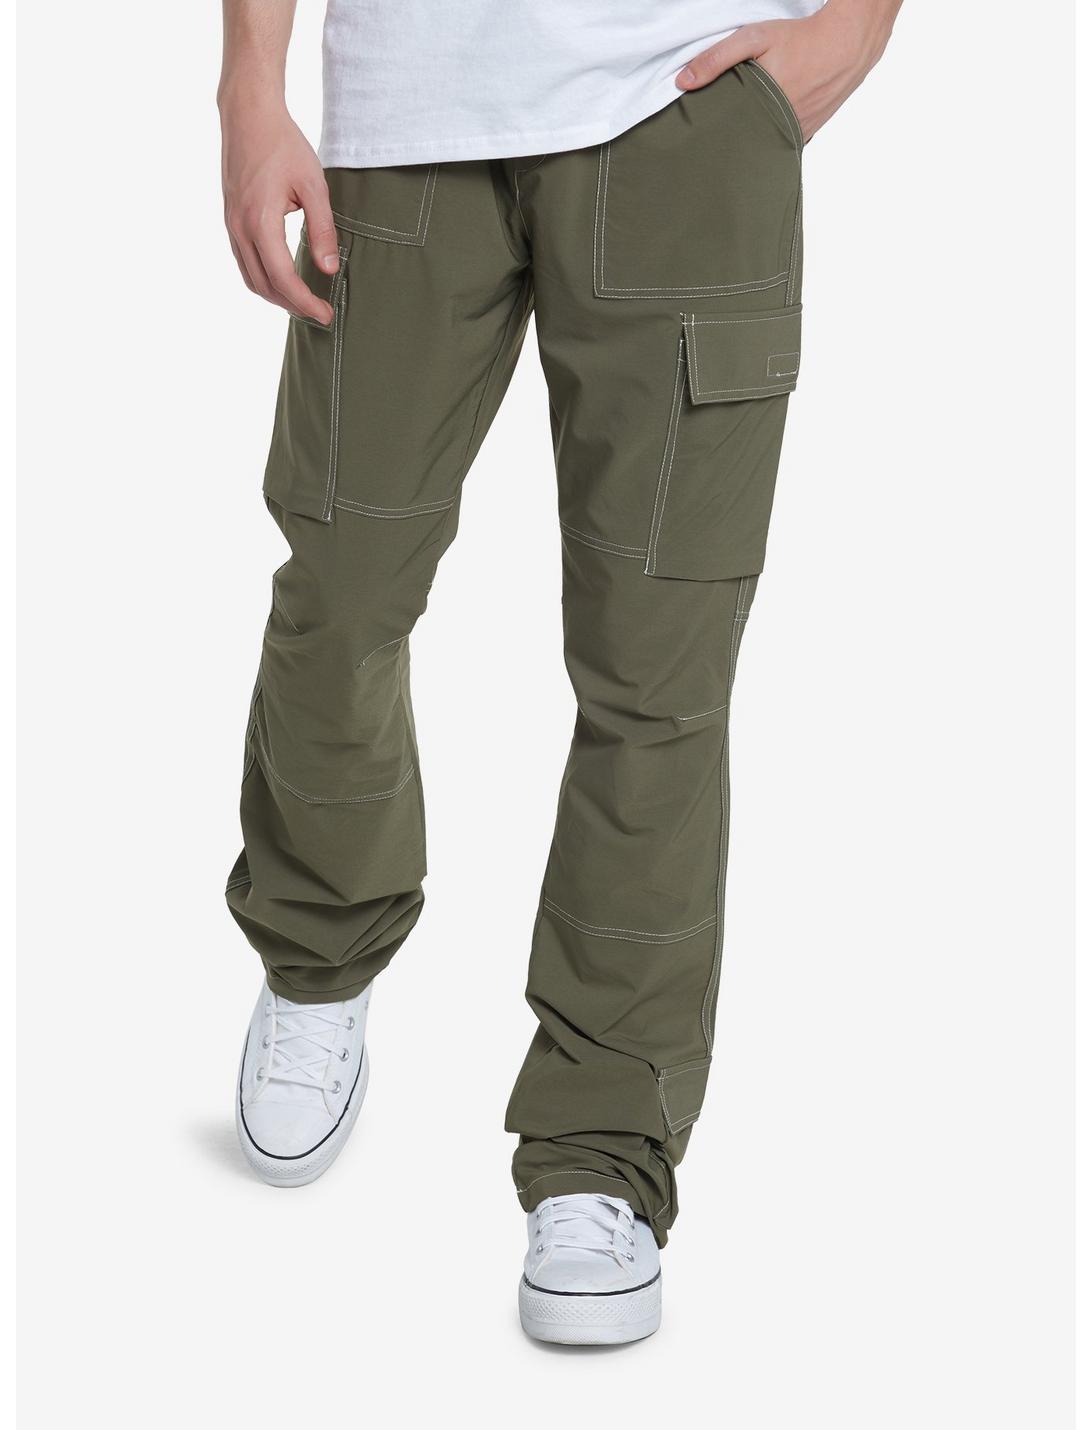 Olive Green Contrast Stitch Cargo Pants, WHITE, hi-res